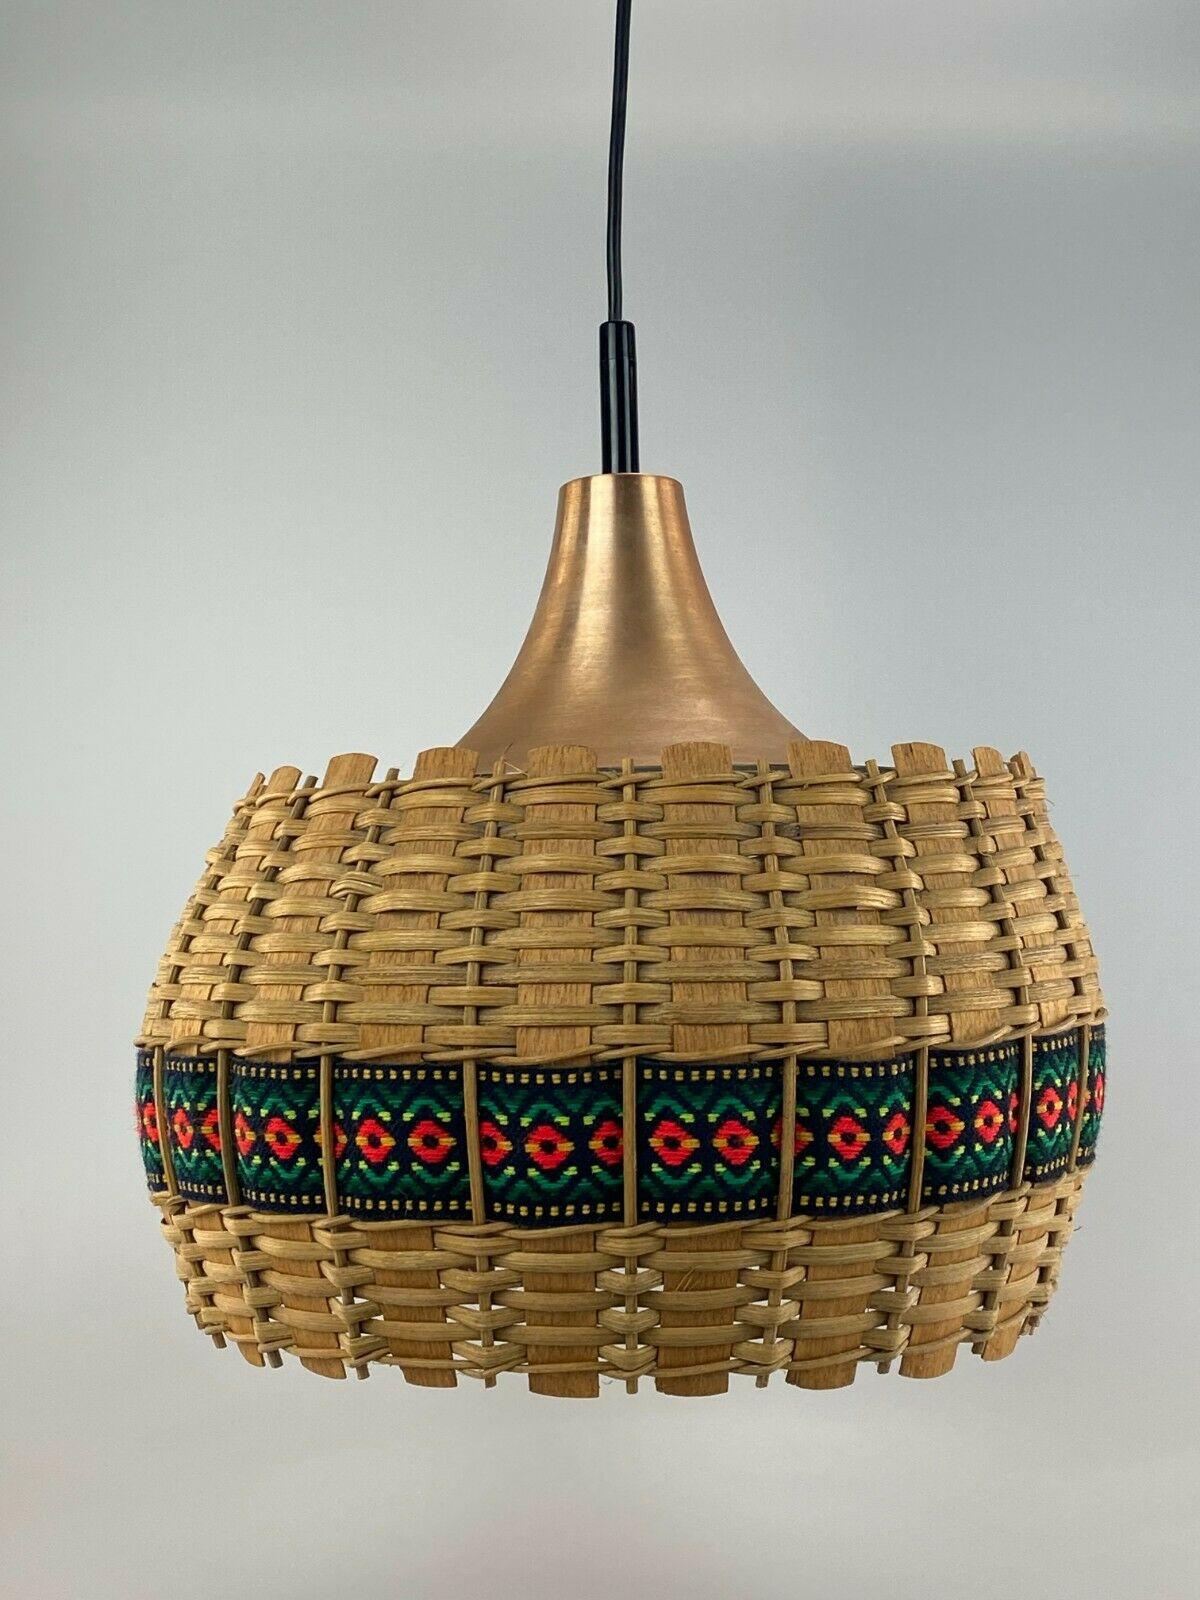 60s 70s lamp light ceiling lamp hanging lamp Doria Glas Space Age Design

Object: hanging lamp

Manufacturer: Doria

Condition: good - vintage

Age: around 1960-1970

Dimensions:

Diameter = 37cm
Height = 40cm

Other notes:

The